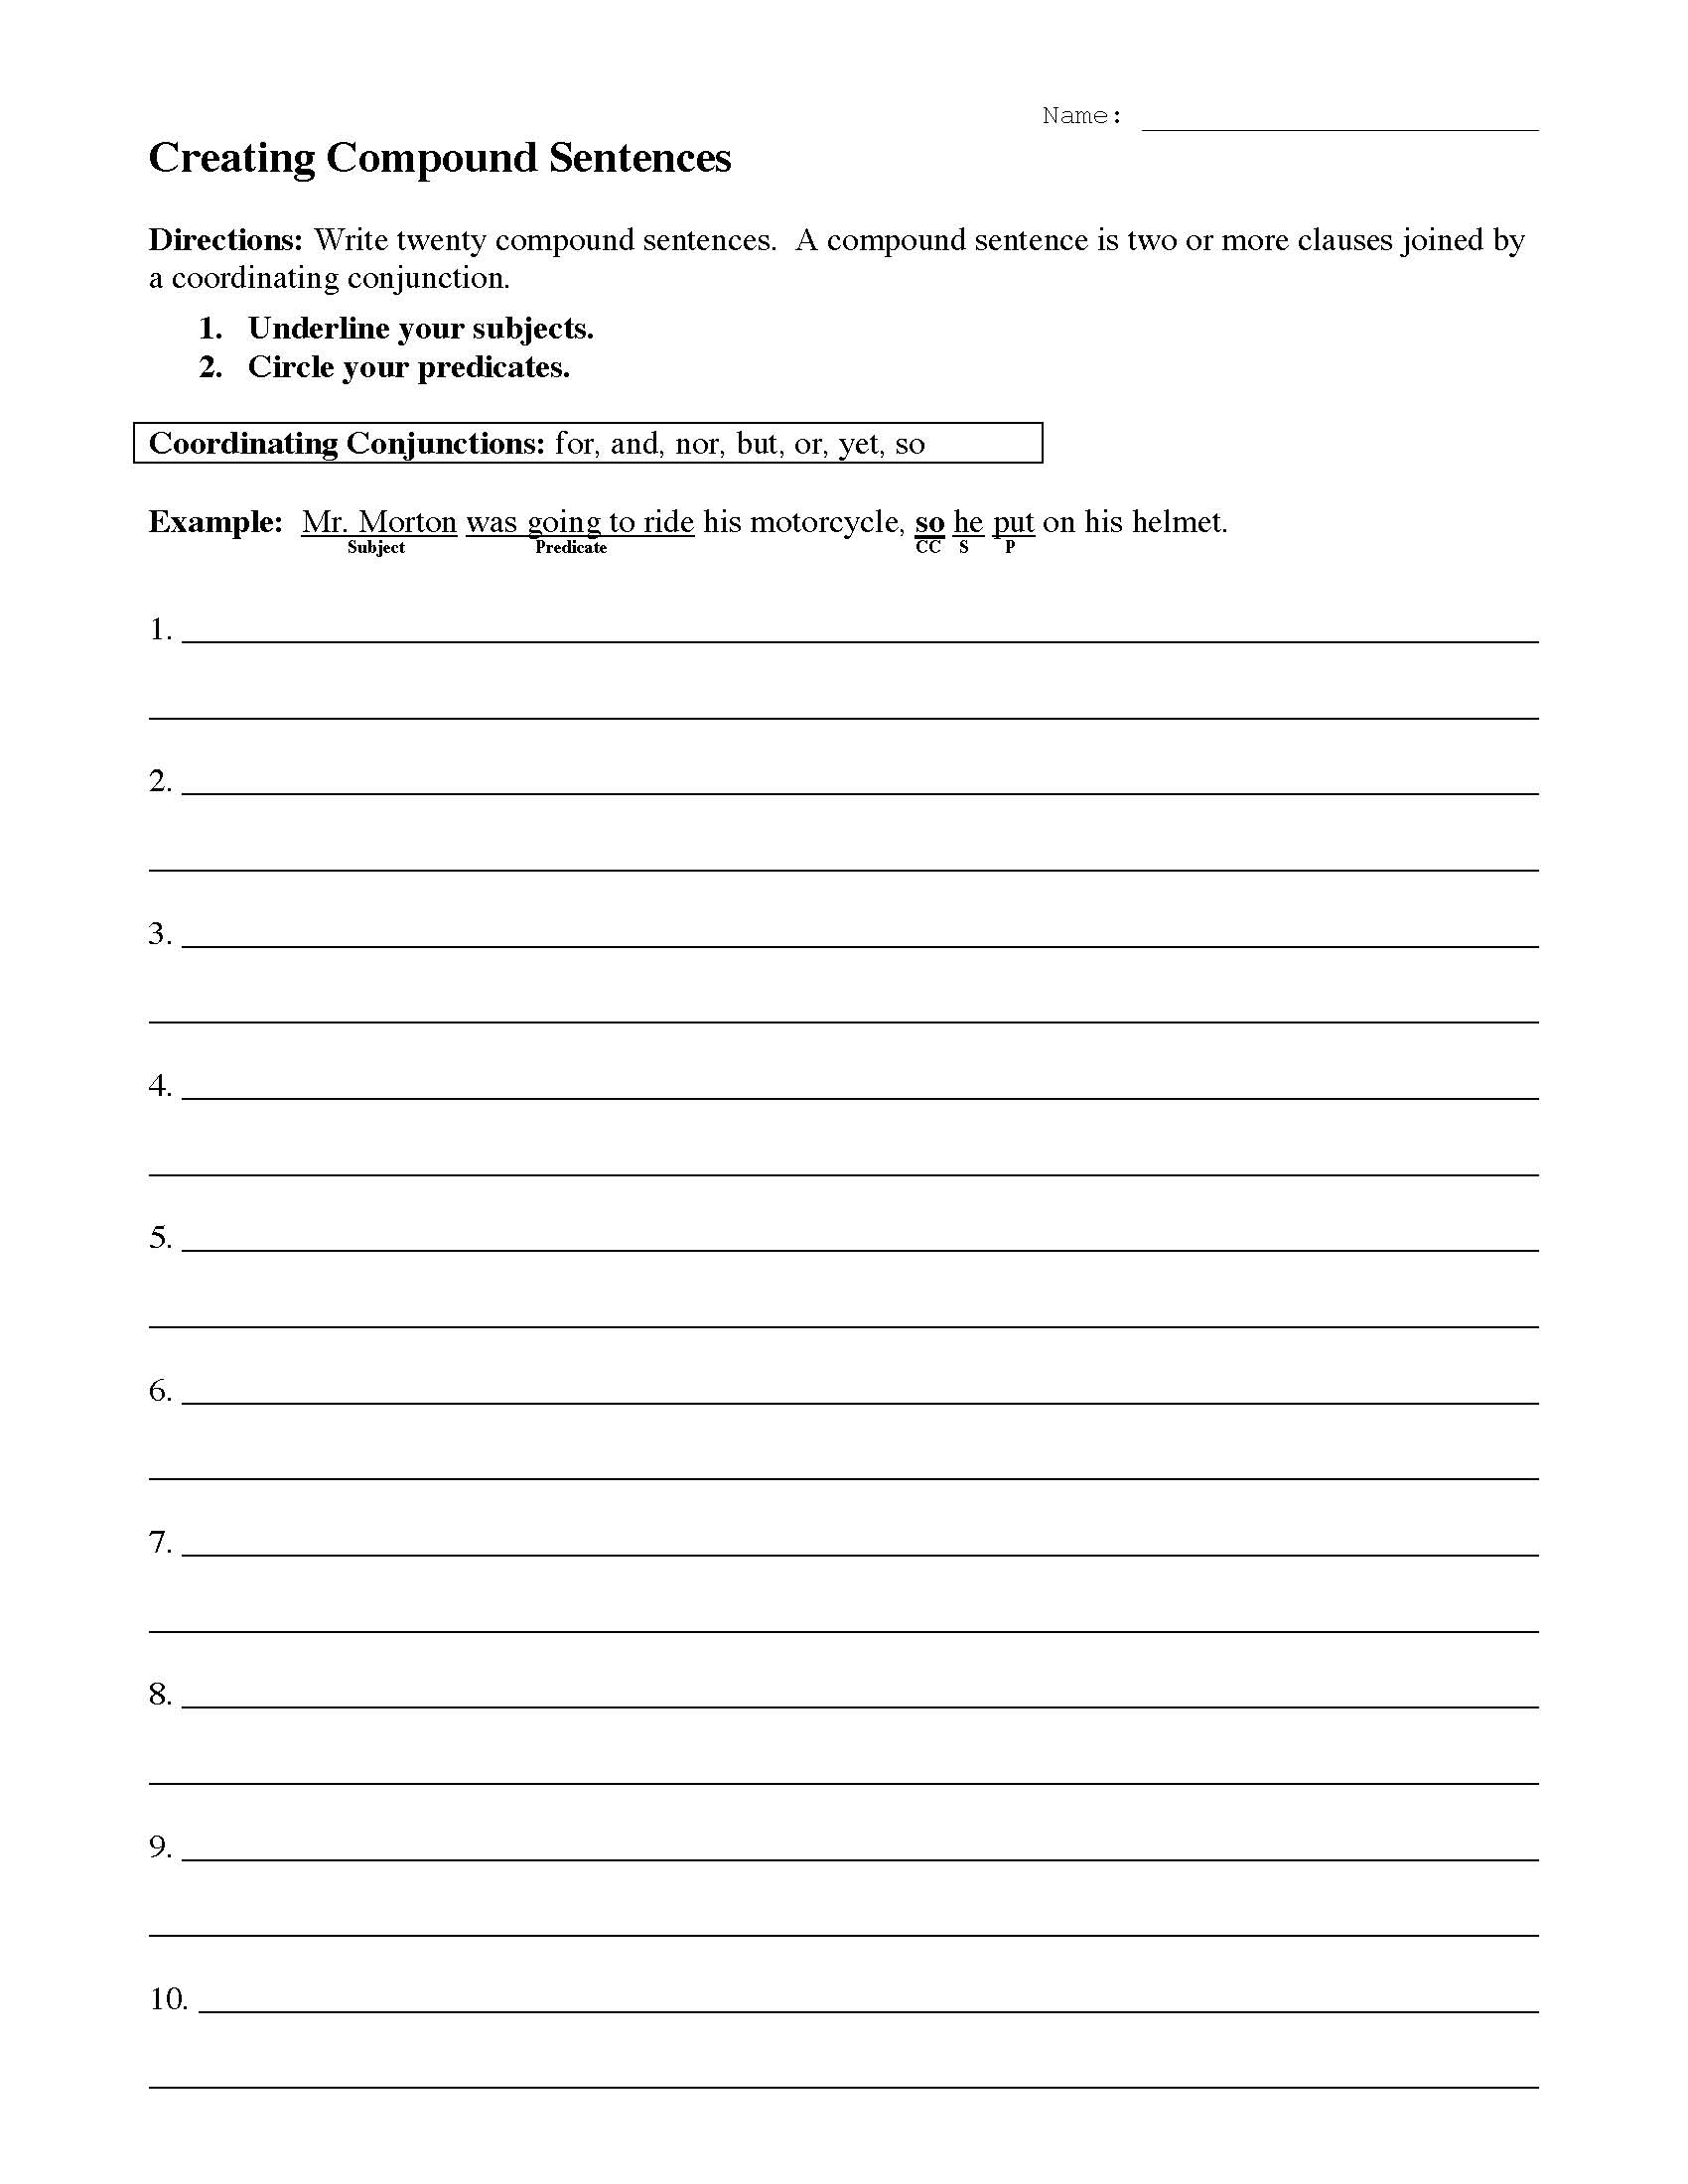 Creating Compound Sentences Worksheet Preview